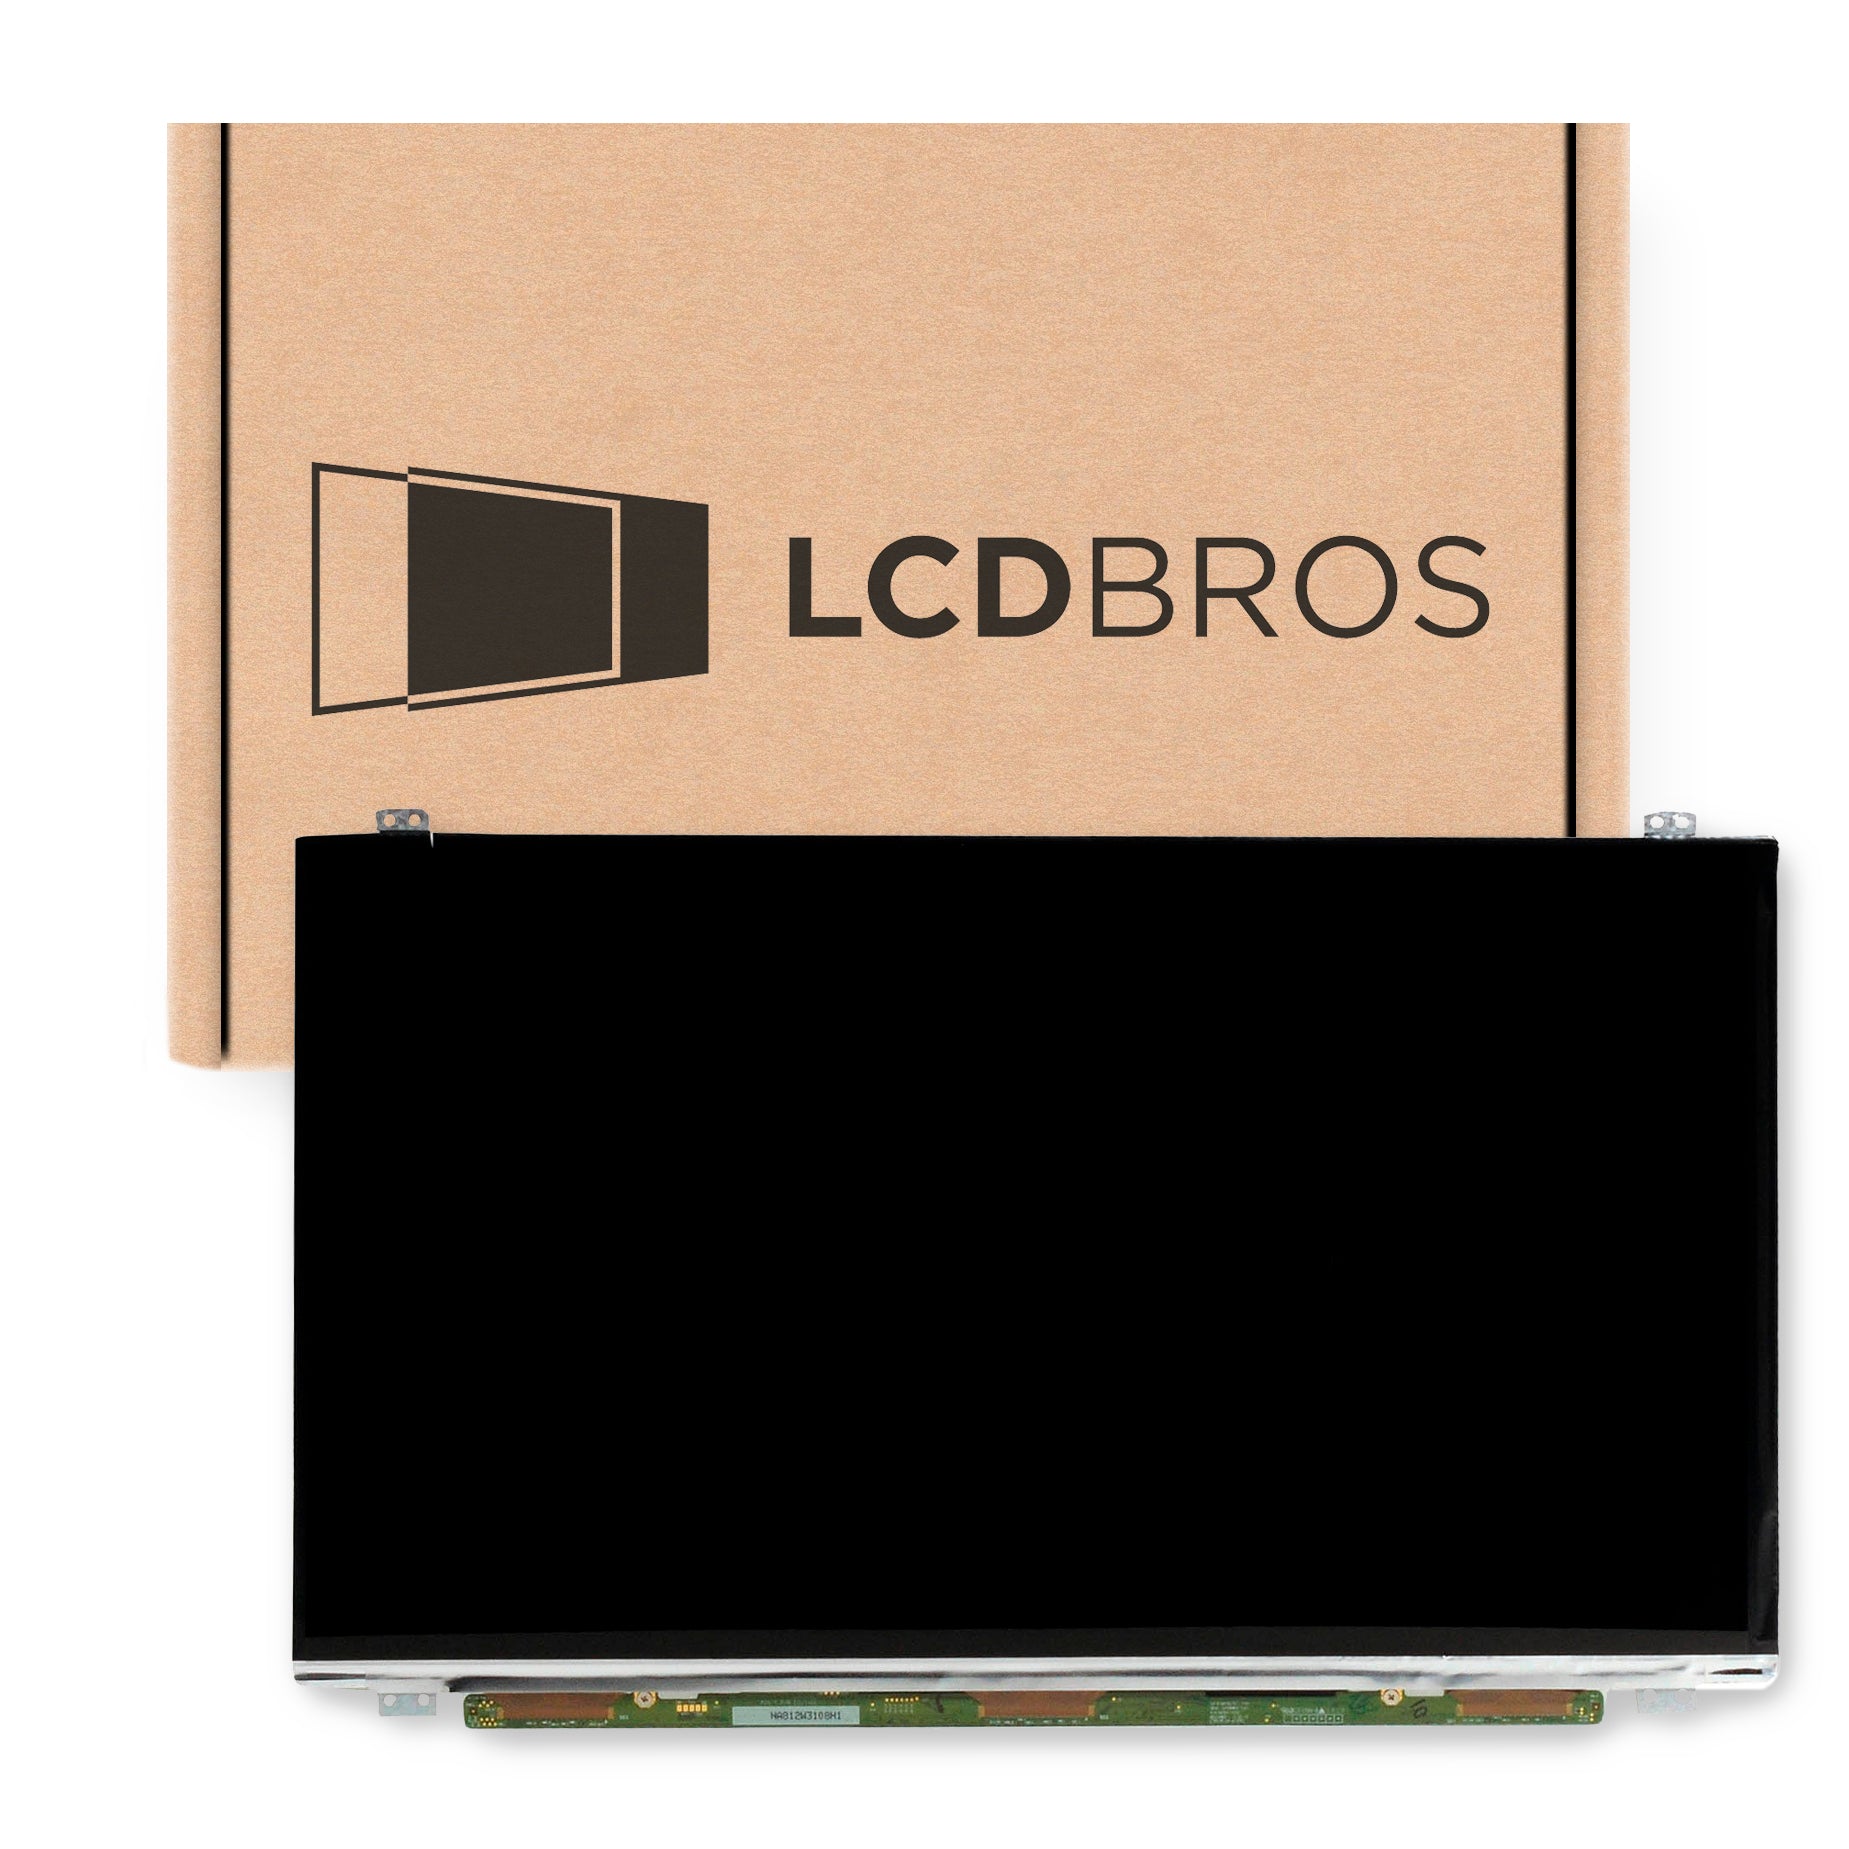 Replacement Screen For LTN156AT30 HD 1366x768 Glossy LCD LED Display